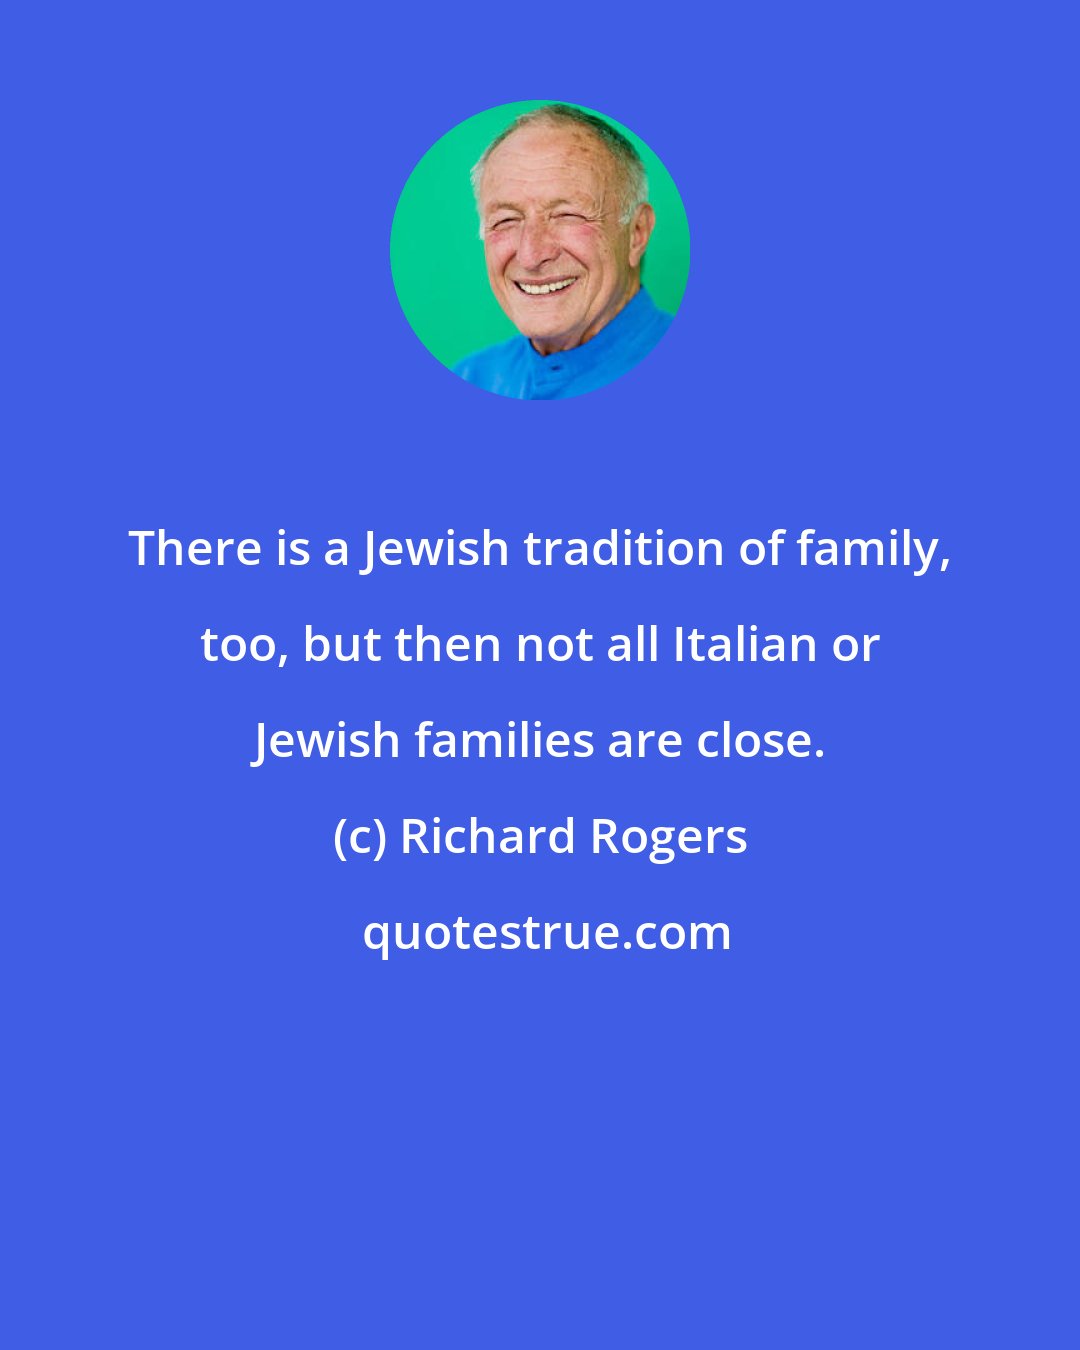 Richard Rogers: There is a Jewish tradition of family, too, but then not all Italian or Jewish families are close.